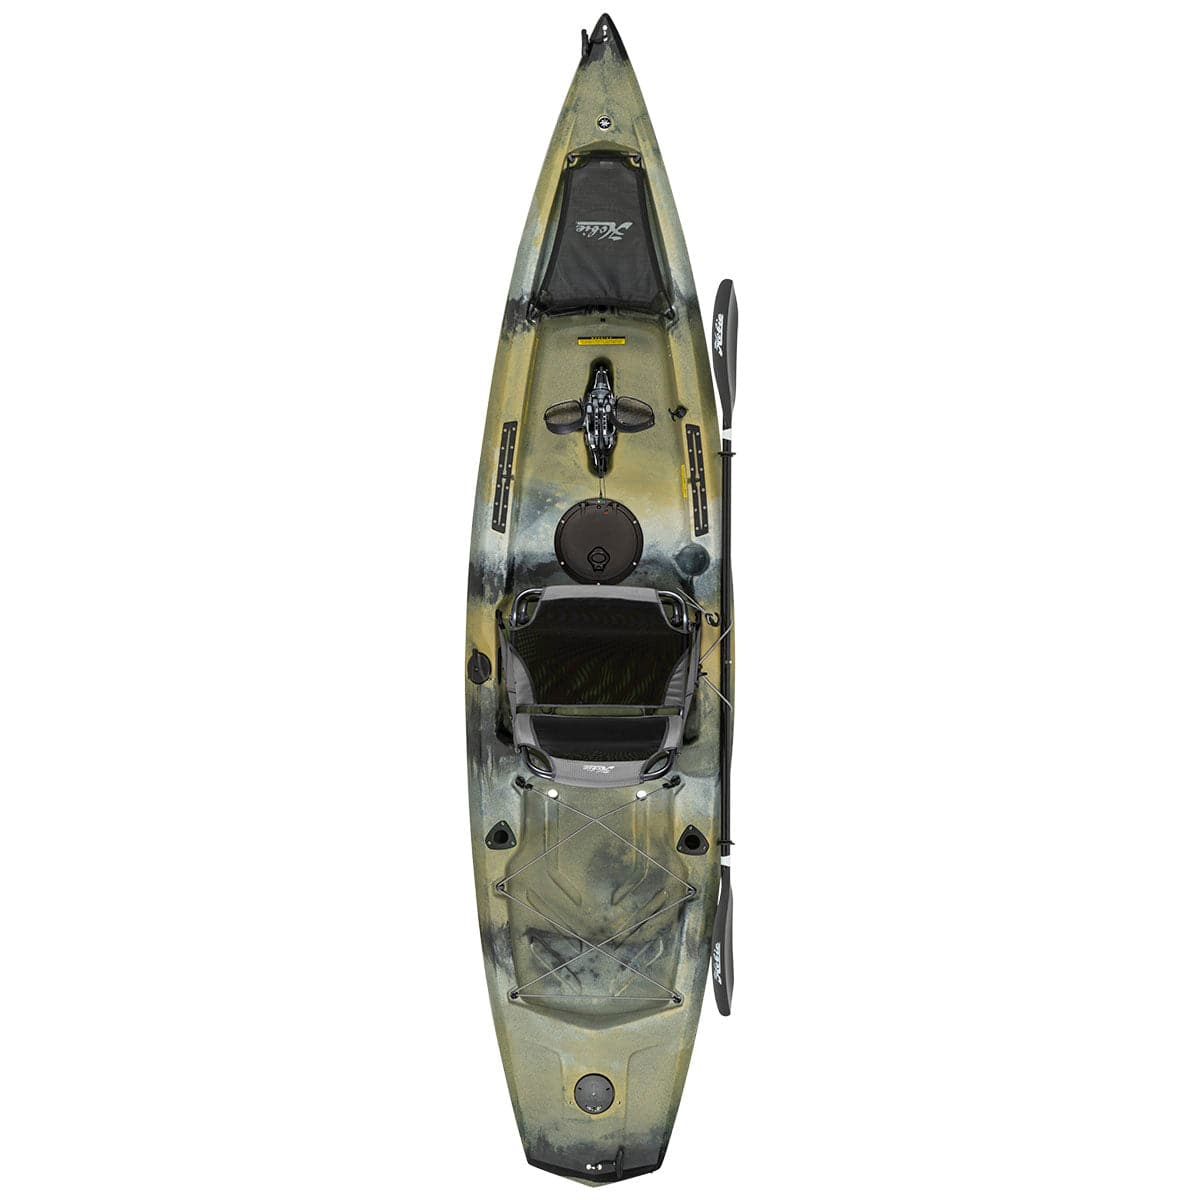 Featuring the Mirage Compass 12 fishing kayak, pedal drive kayak manufactured by Hobie shown here from a third angle.